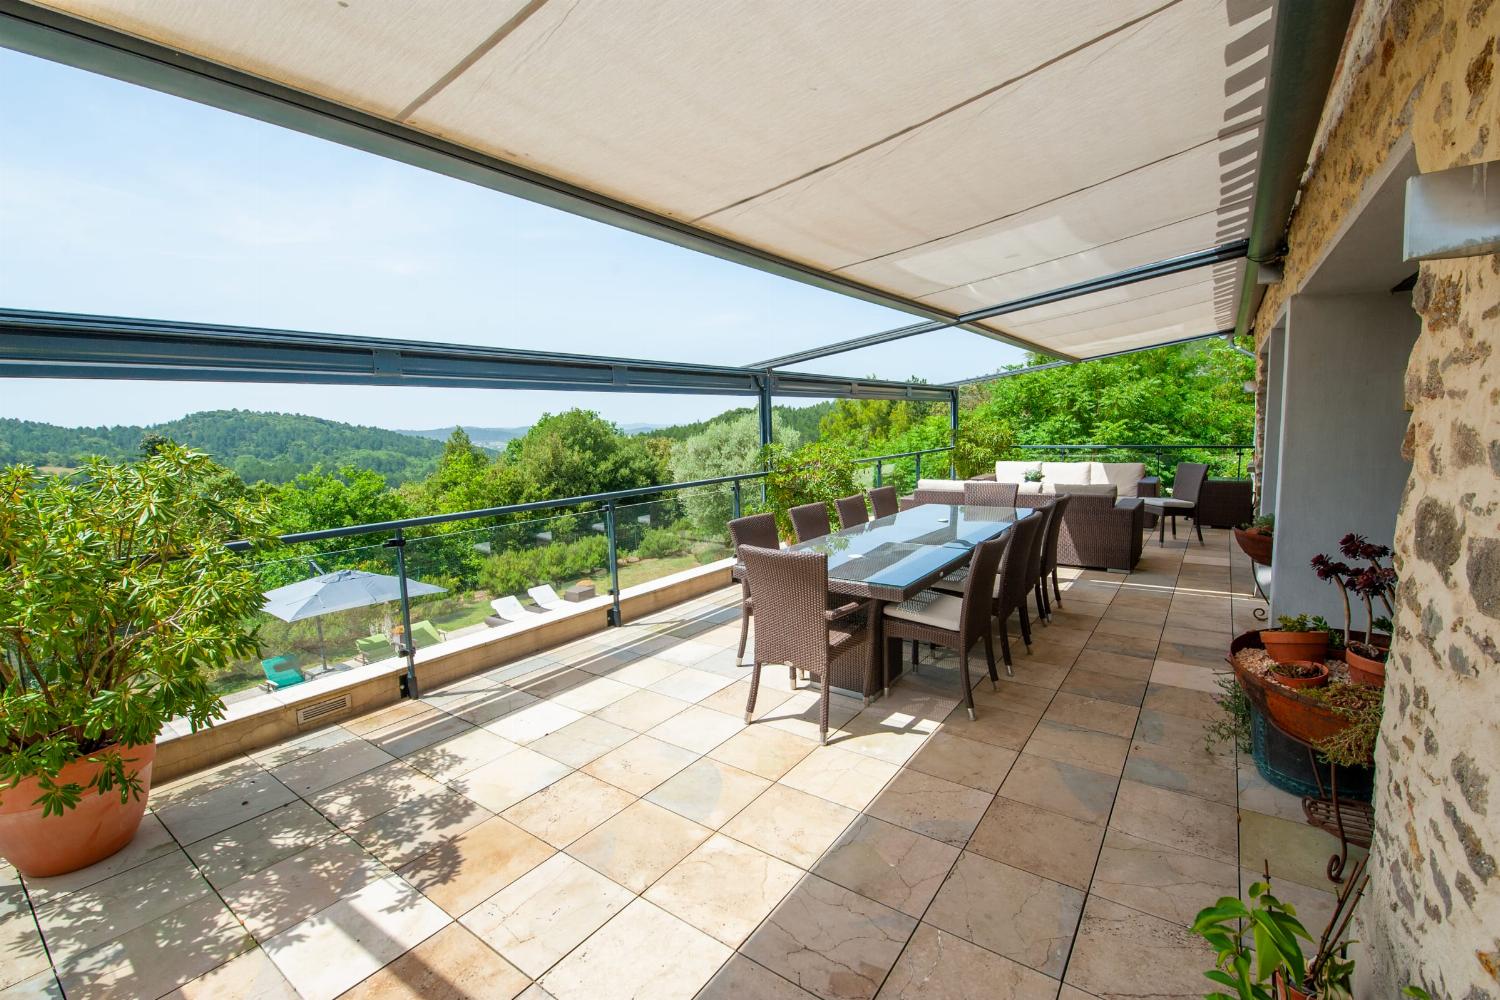 Shaded dining Terrace